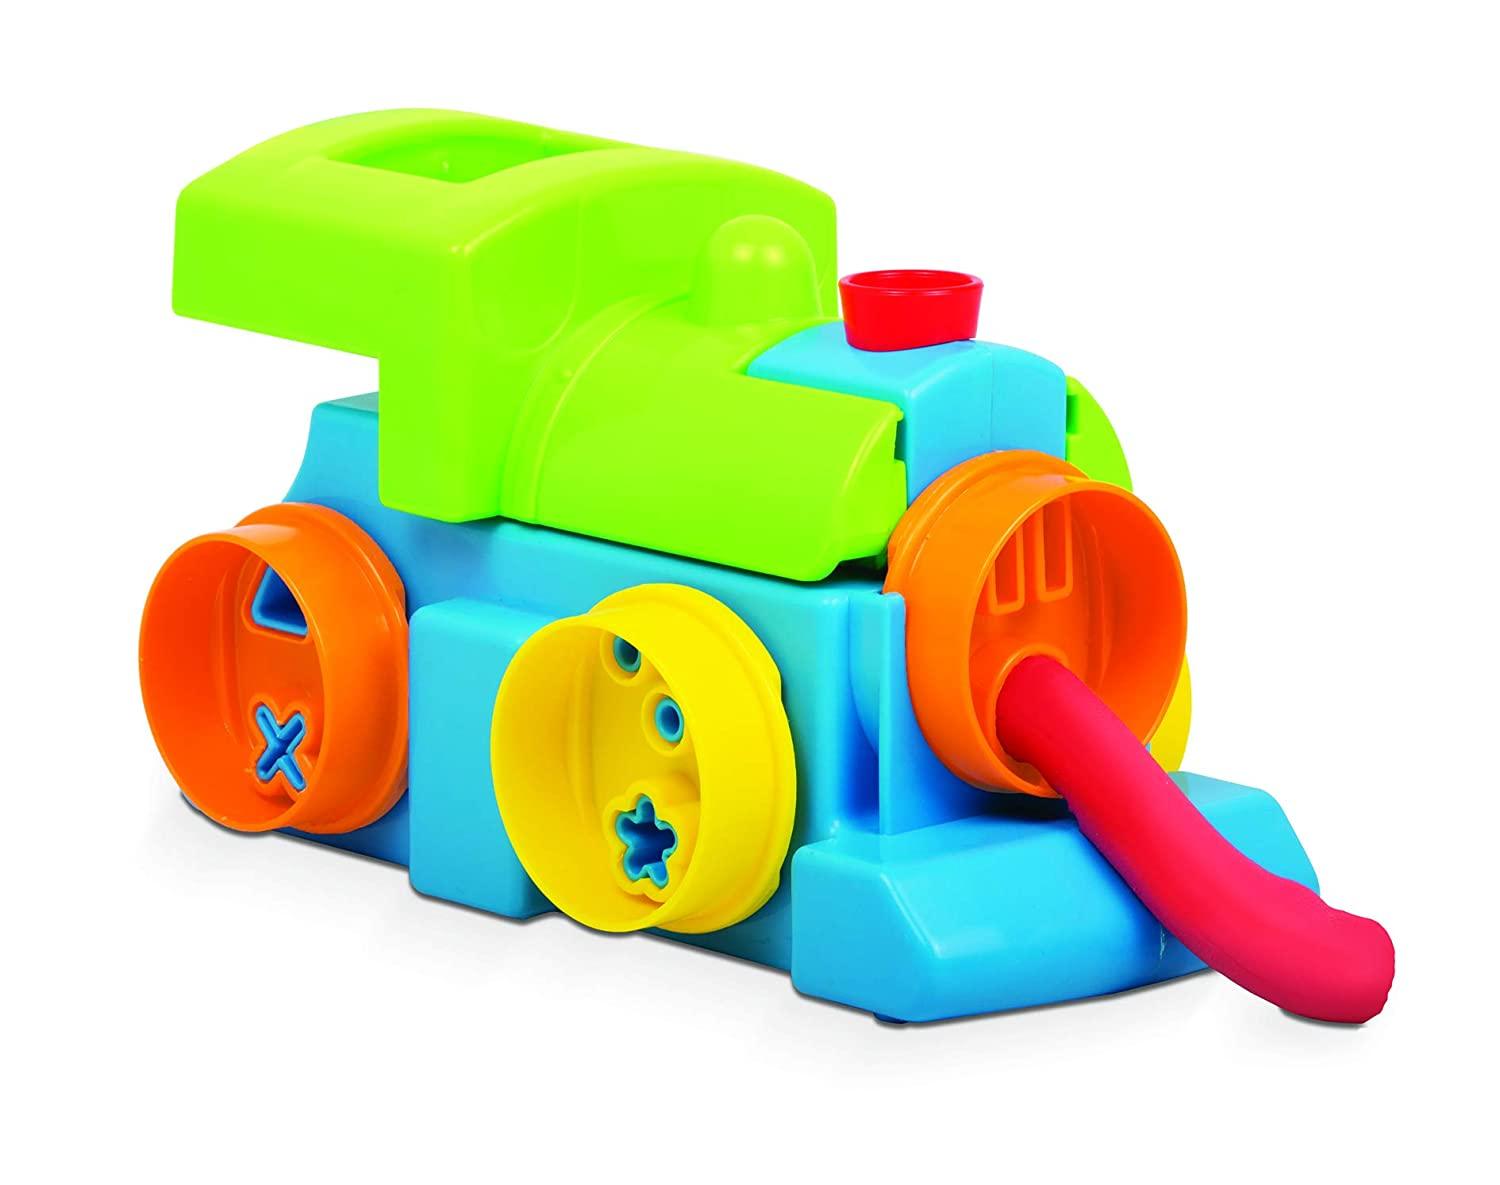 Funskool FunDough Wheel-O-Train - Cutting and Mouding Playset for Ages 3-12 Years